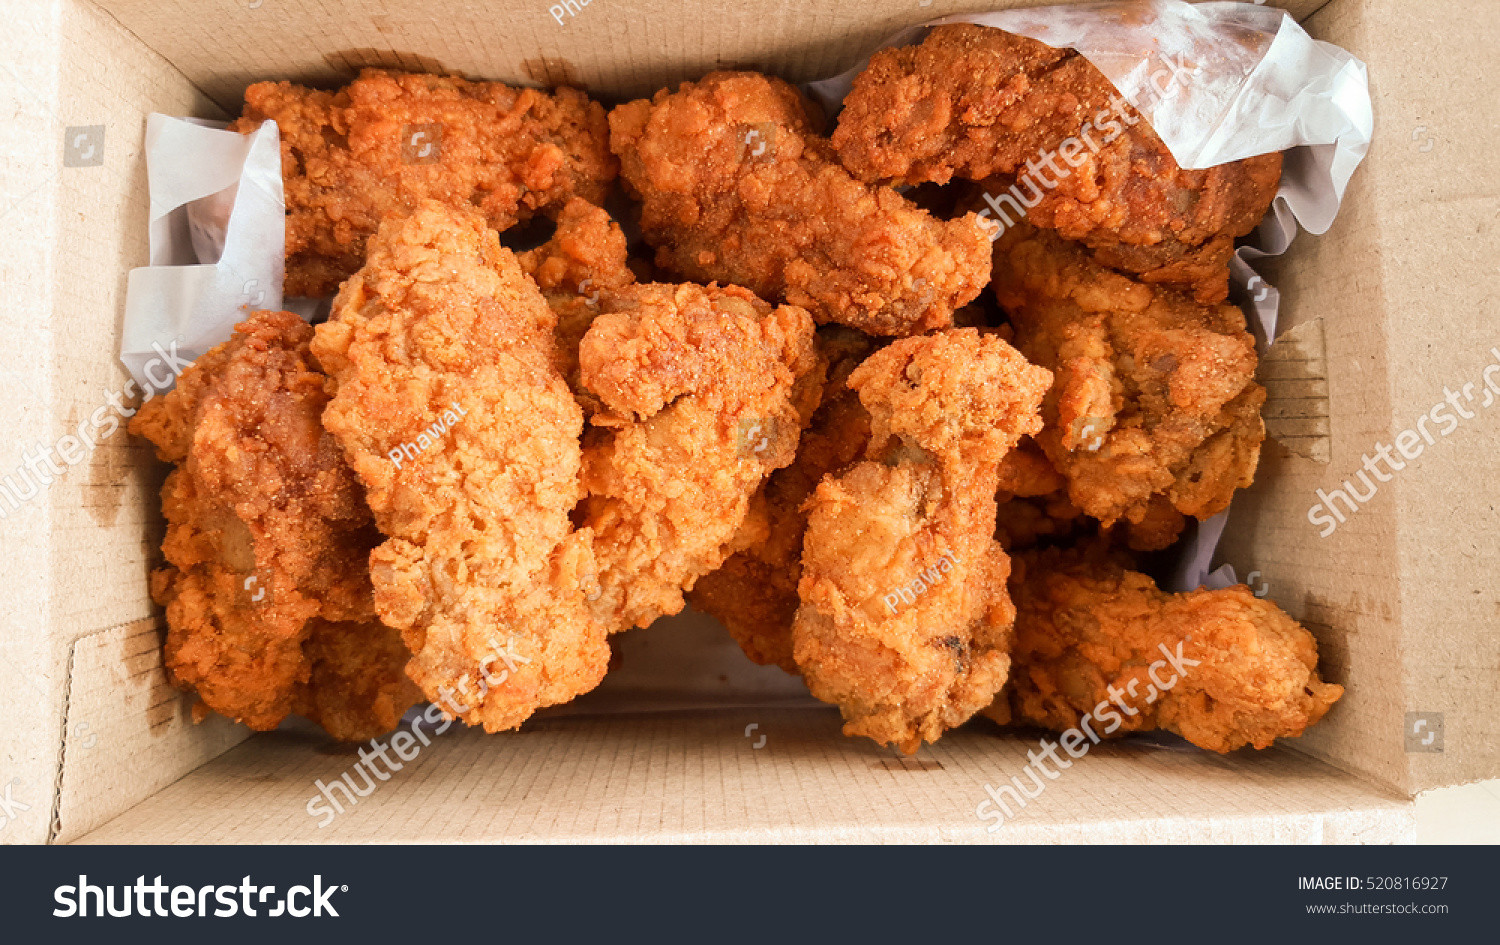 Fried Chicken Delivery
 Crispy Kentucky Fried Chicken Delivery Box Stock